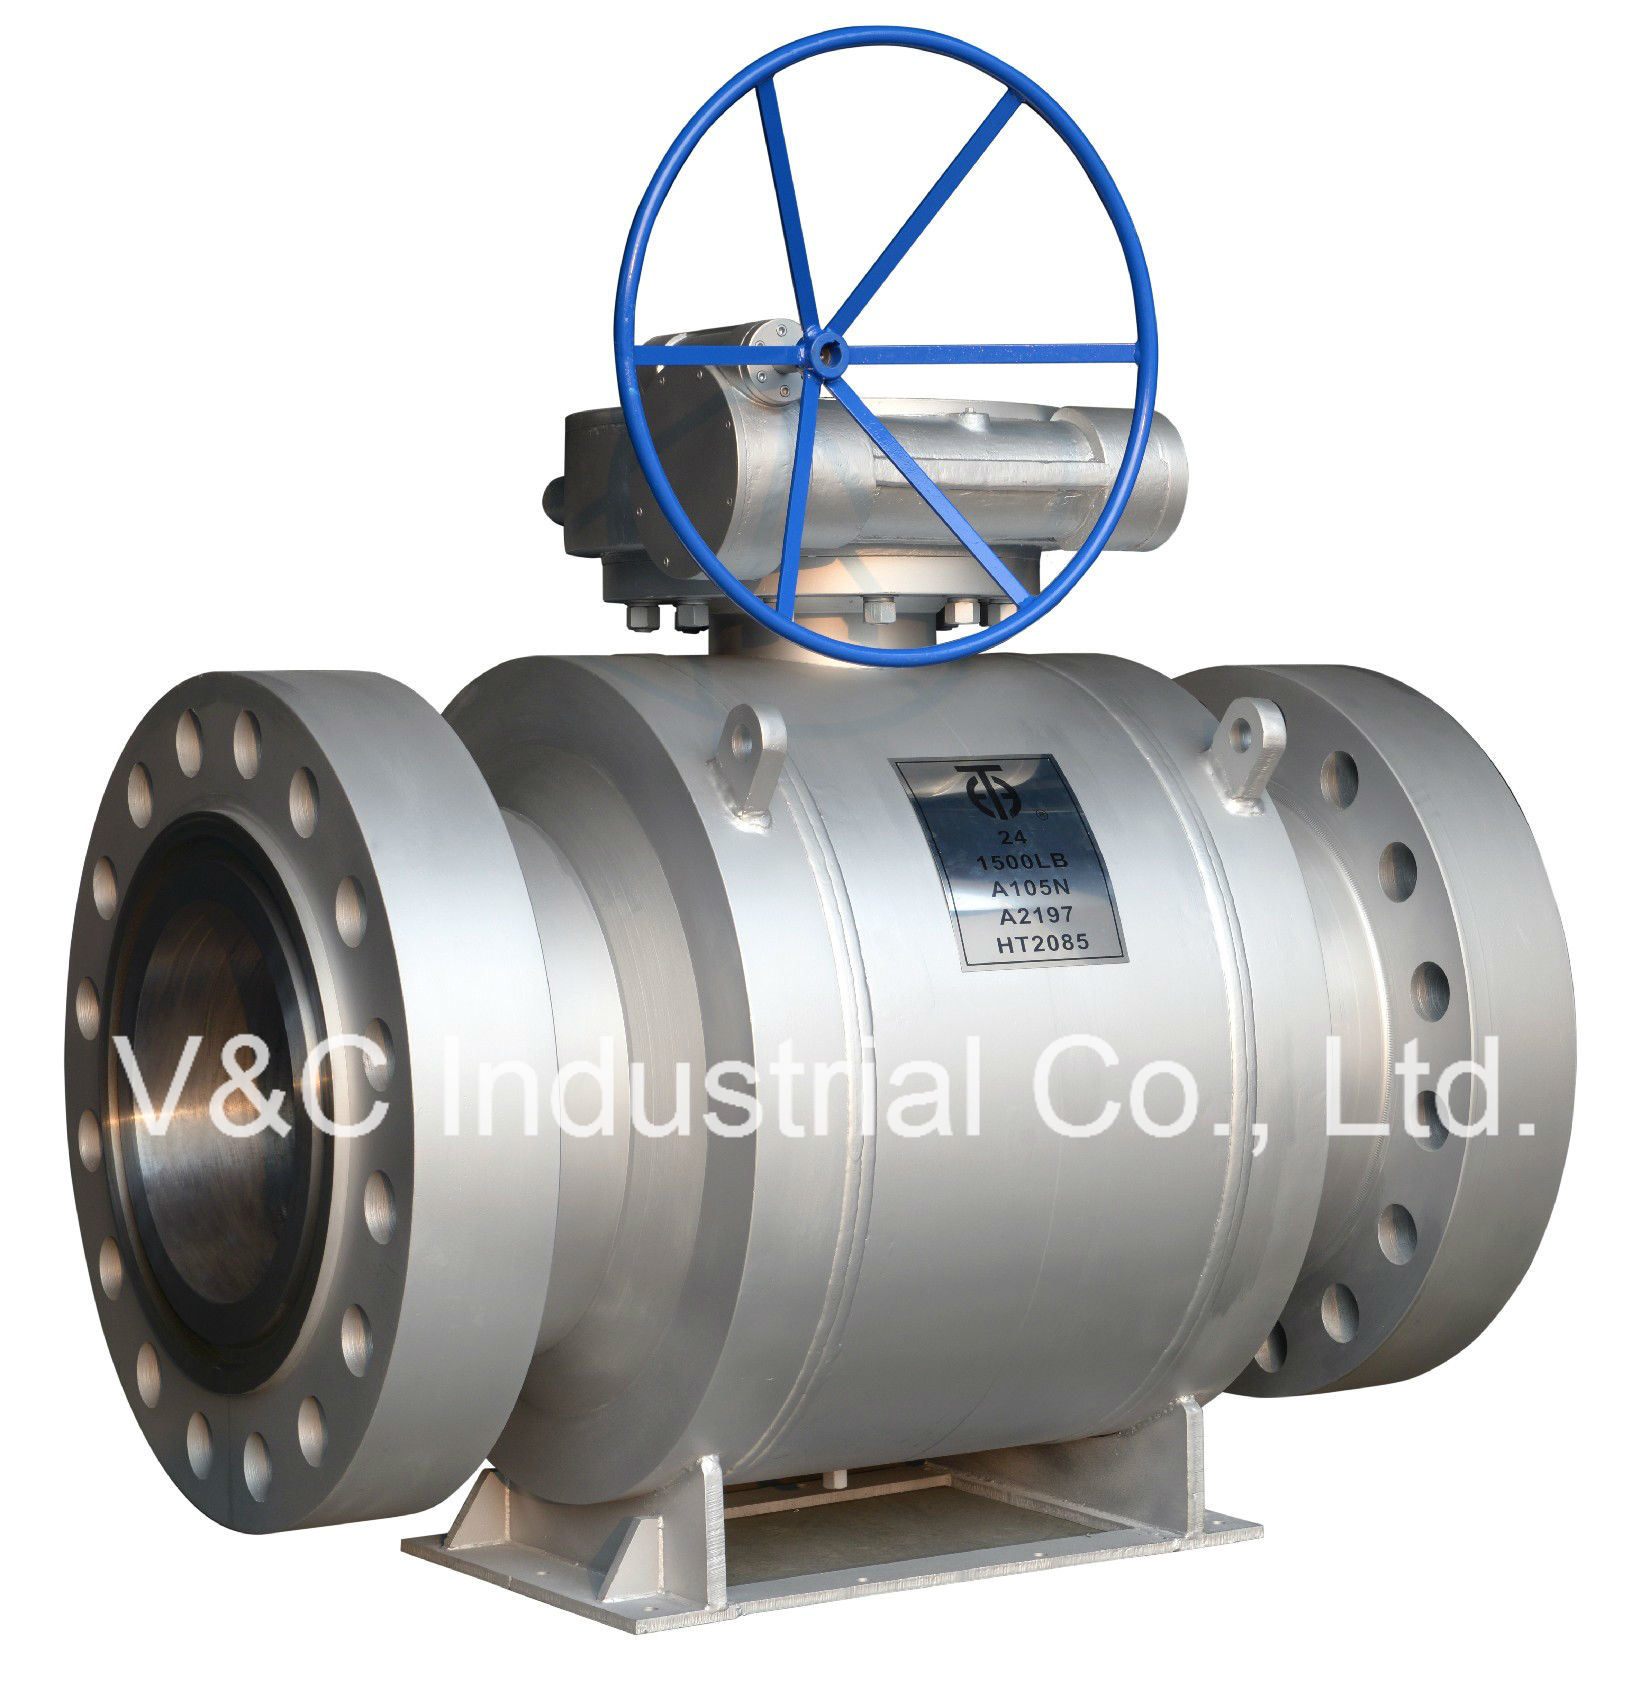 Ball Valve with Pneumatic Oparetion for Oil & Gas